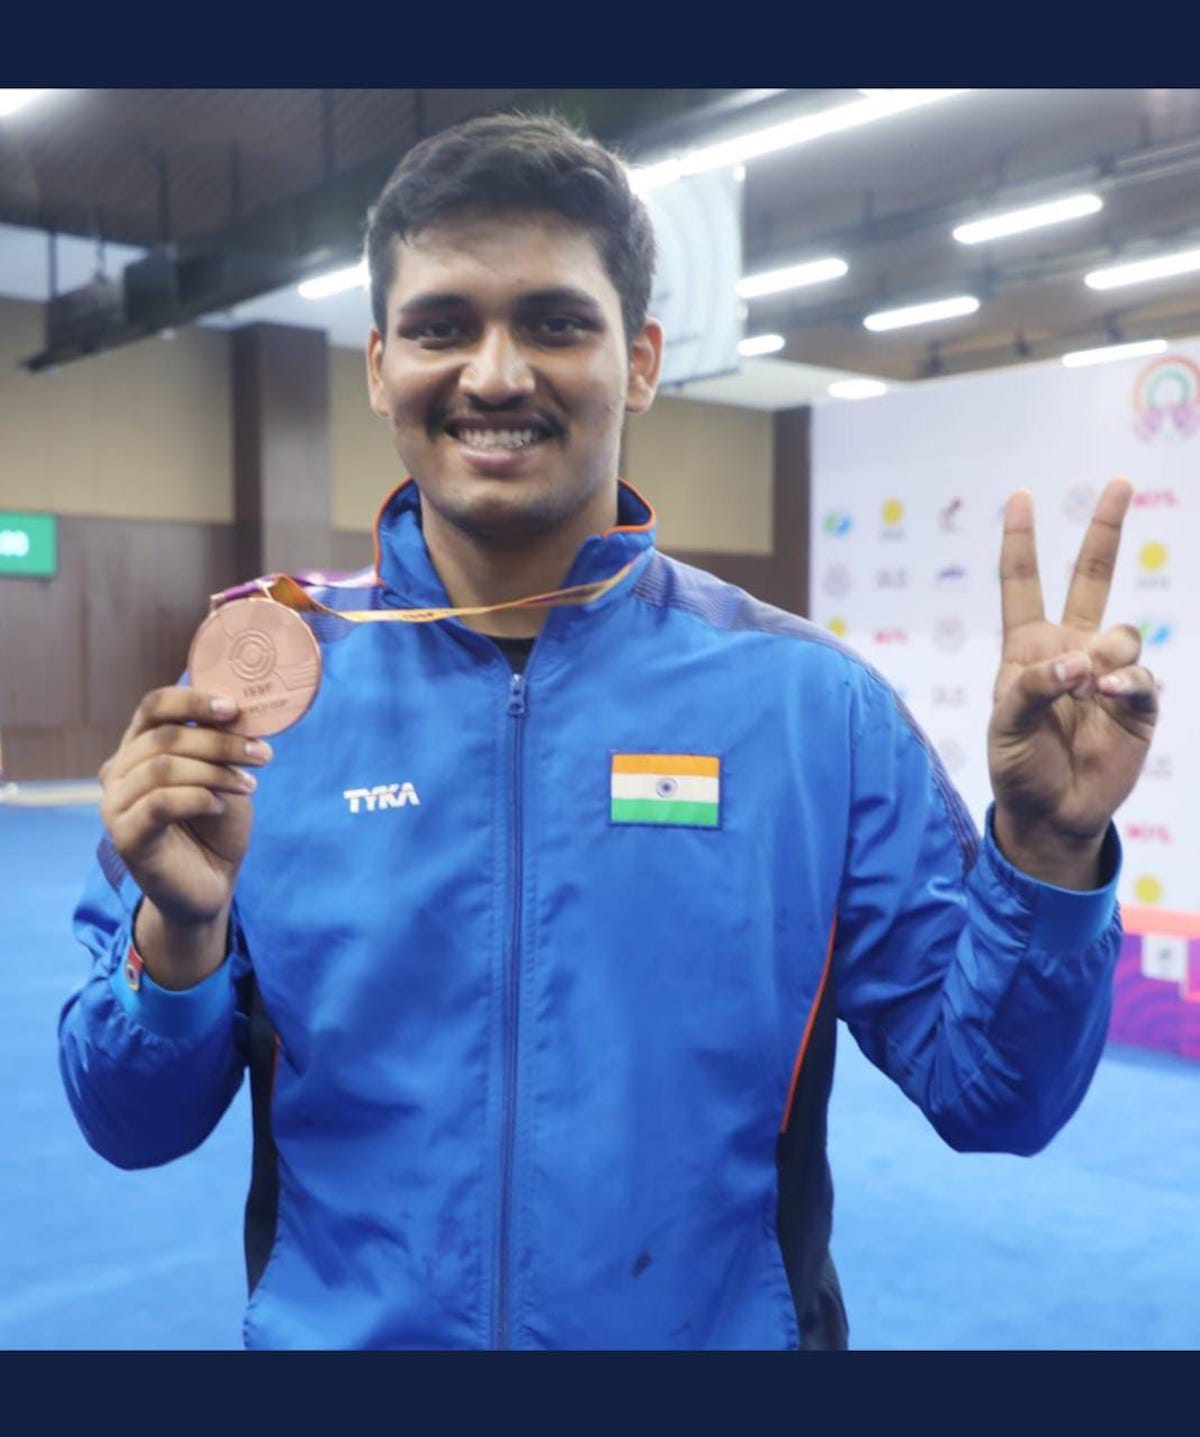 Shooter Rudrankksh aims for consistency at Asiad